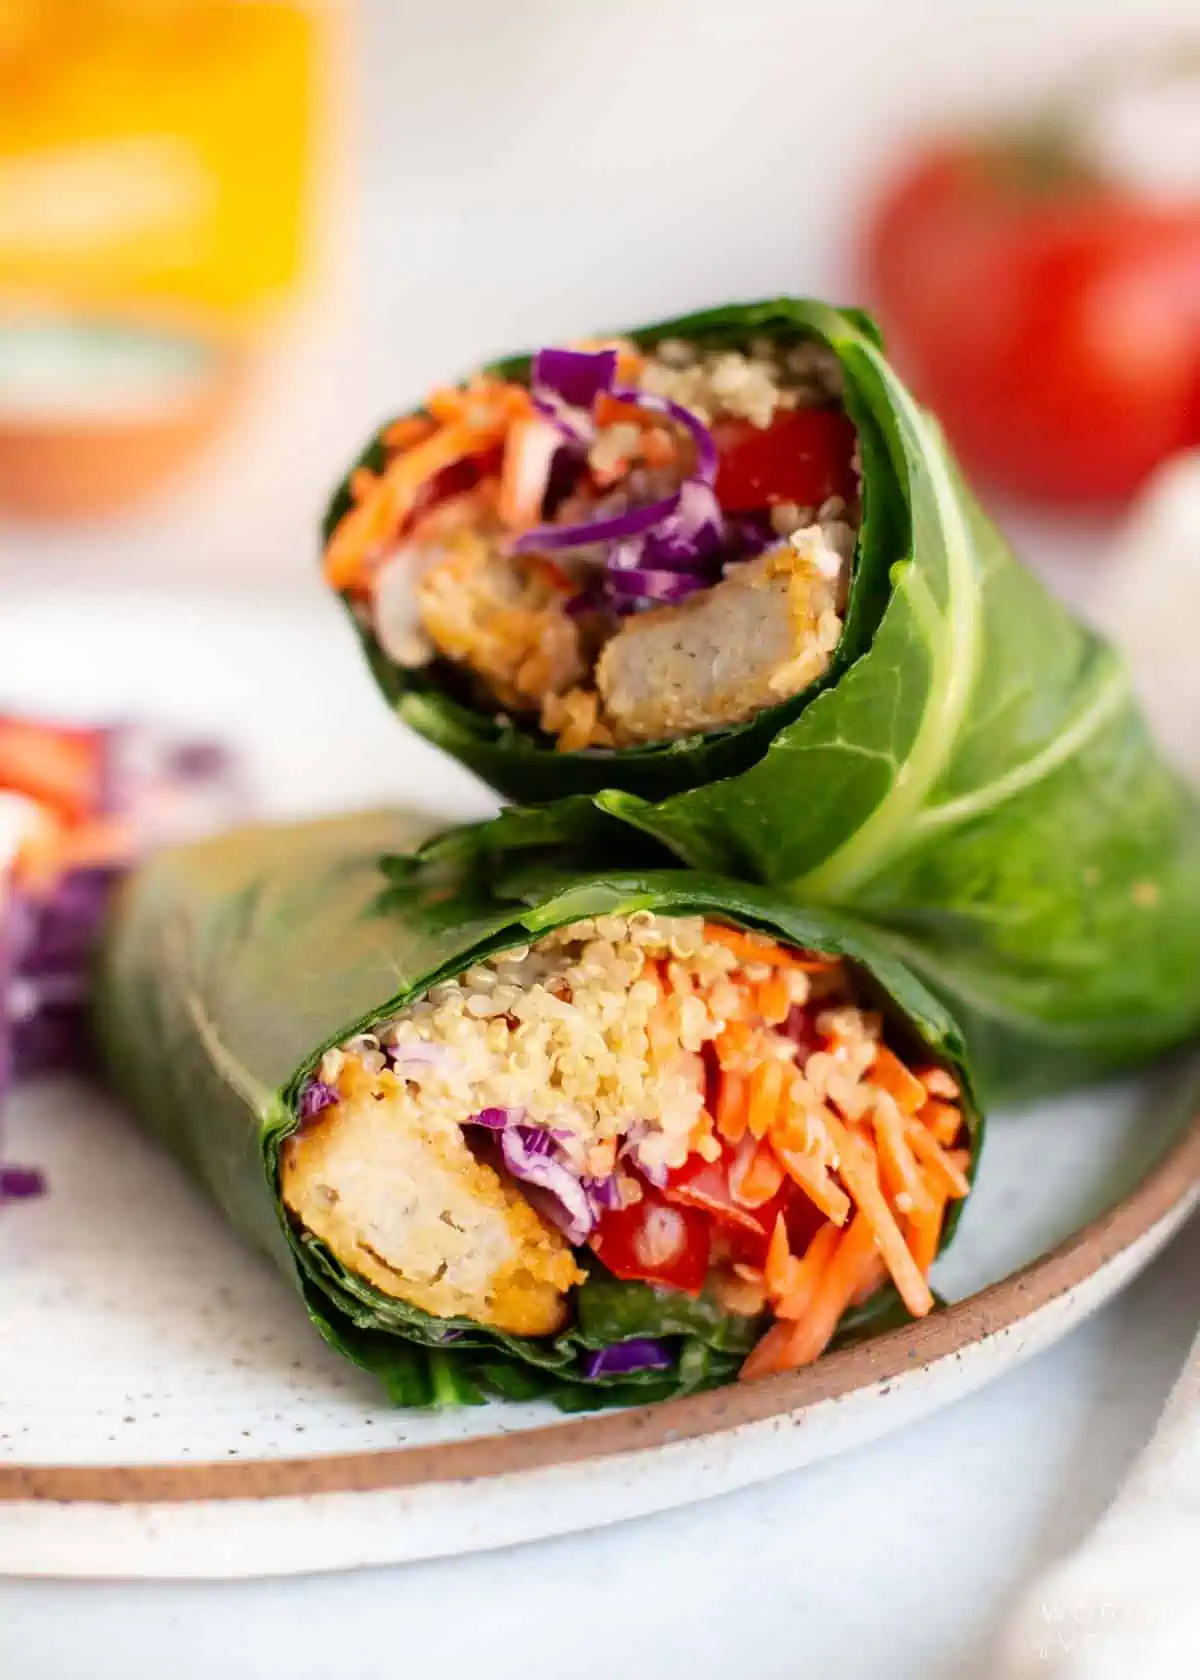 Two halves of a collard green wrap stacked on a plate.